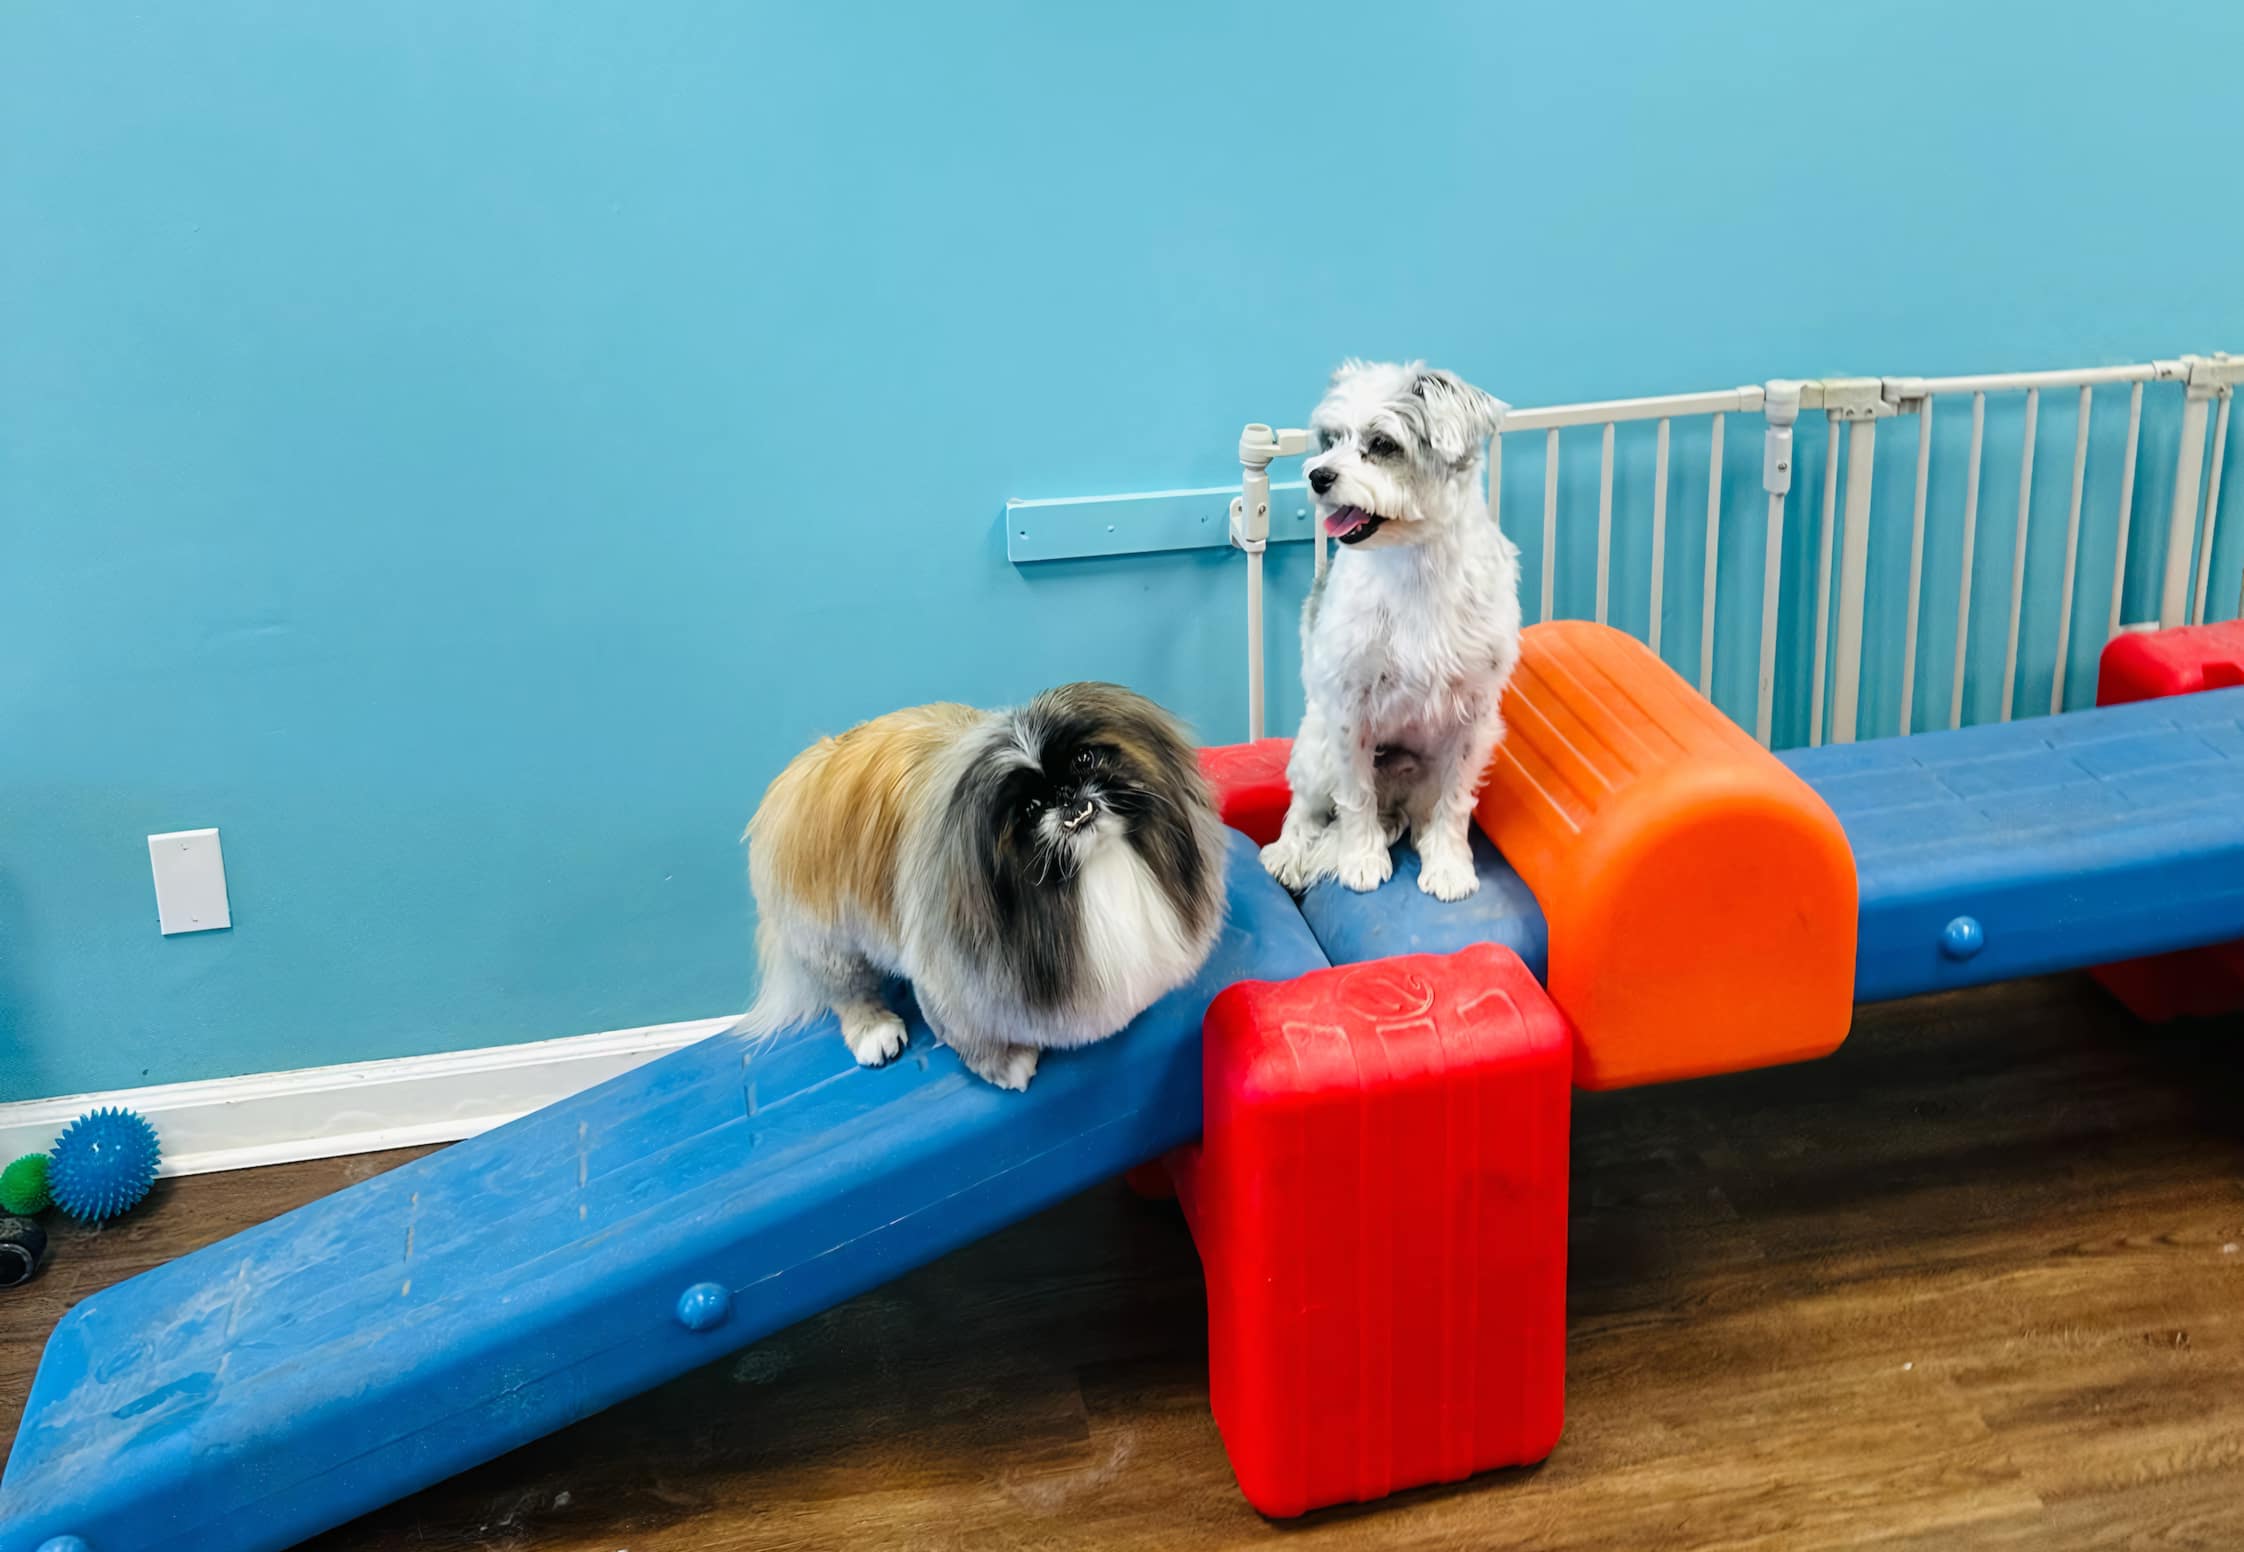 A Pekingese and terrier dog playing on a bright blue ramp at Tali Tails Dog Grooming and Daycare, Canoga Park. They have happy expressions and the environment is colorful. The wall is bright blue. There are some dog toys in the background.